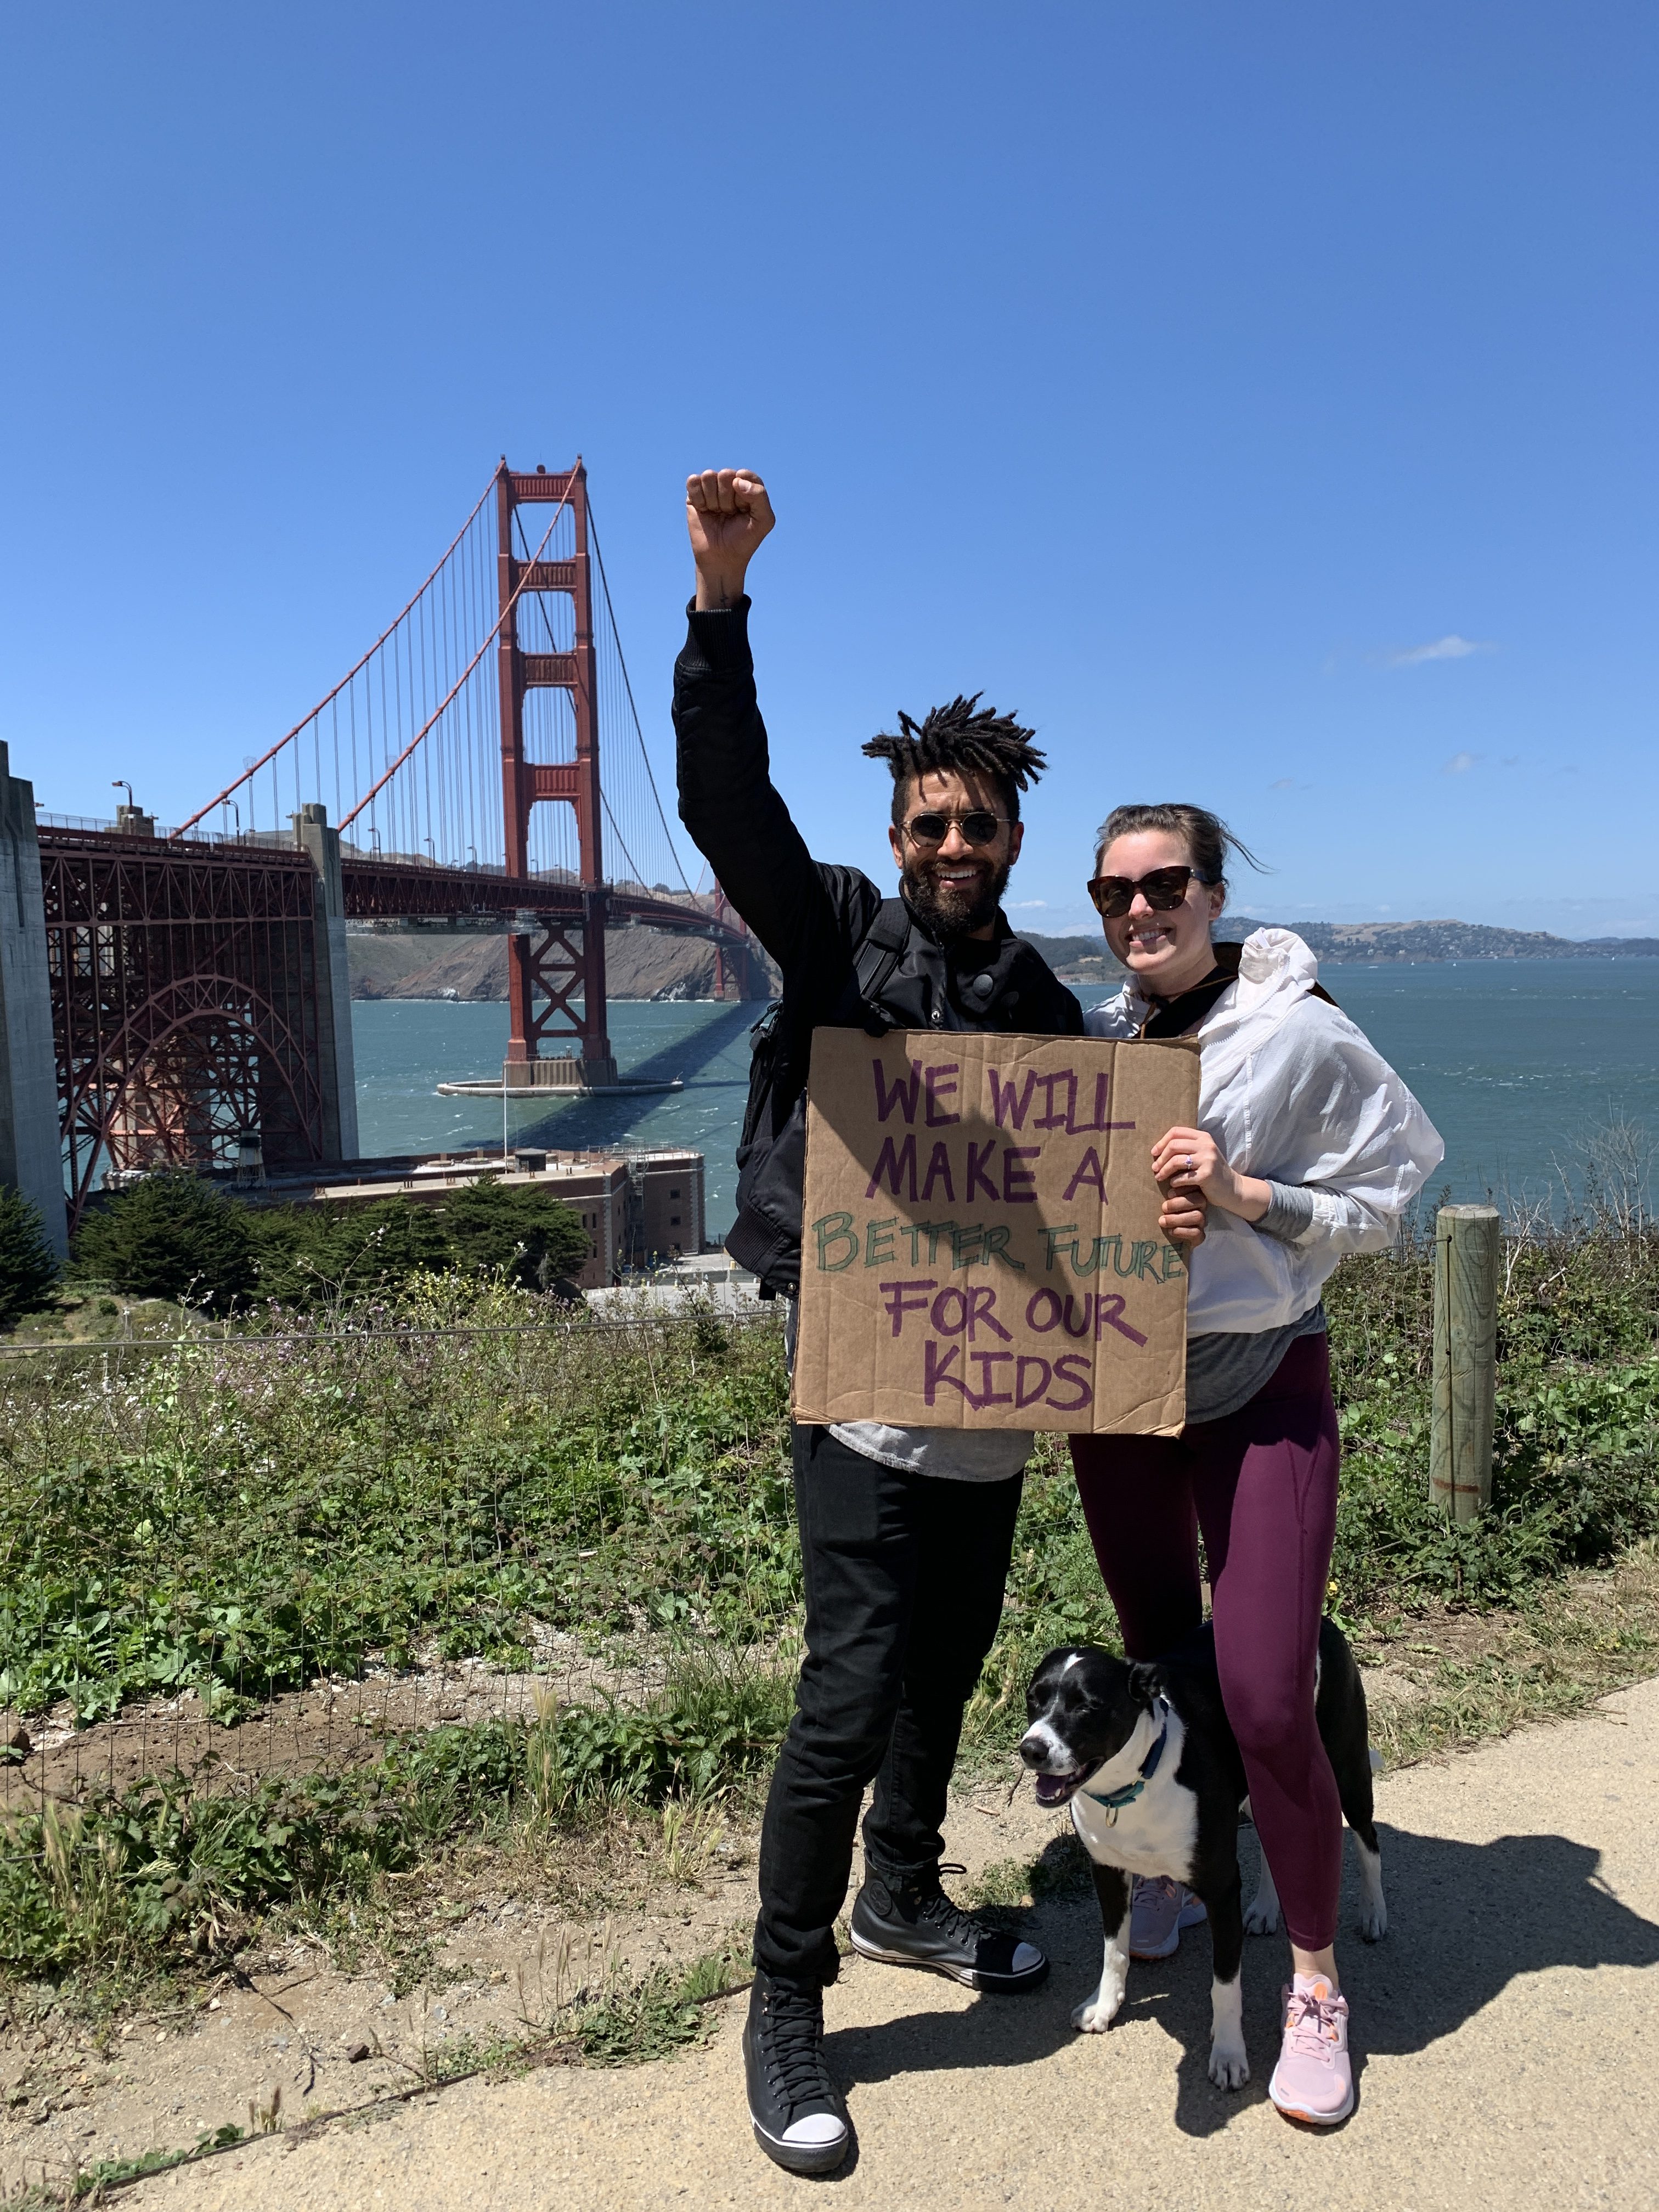 Quin Messenger and Carrie Montgomery attend a Black Lives Matter protest in San Francisco on June 6, 2020. (Carrie Montgomery)